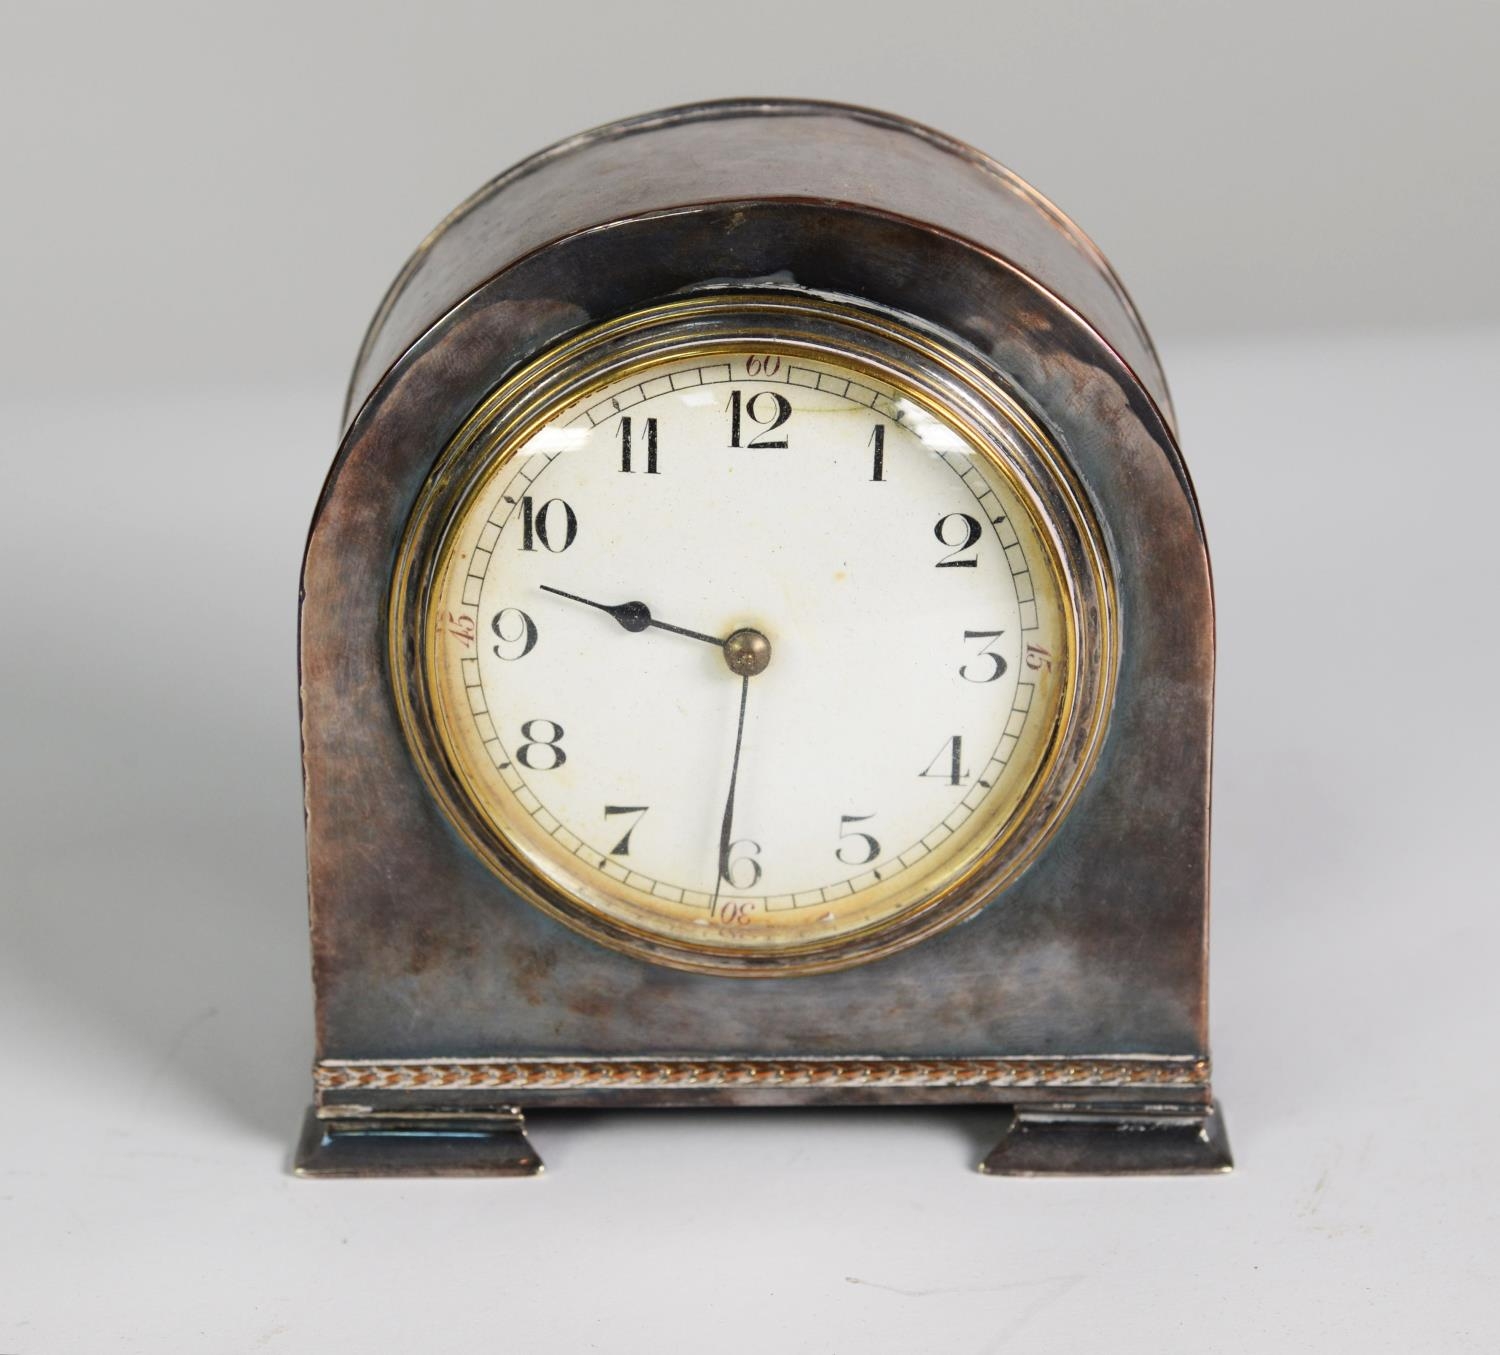 EARLY 20th CENTURY SMALL MANTEL CLOCK IN PLANISHED ELECTRO-PLATED CASE with white Arabic dial